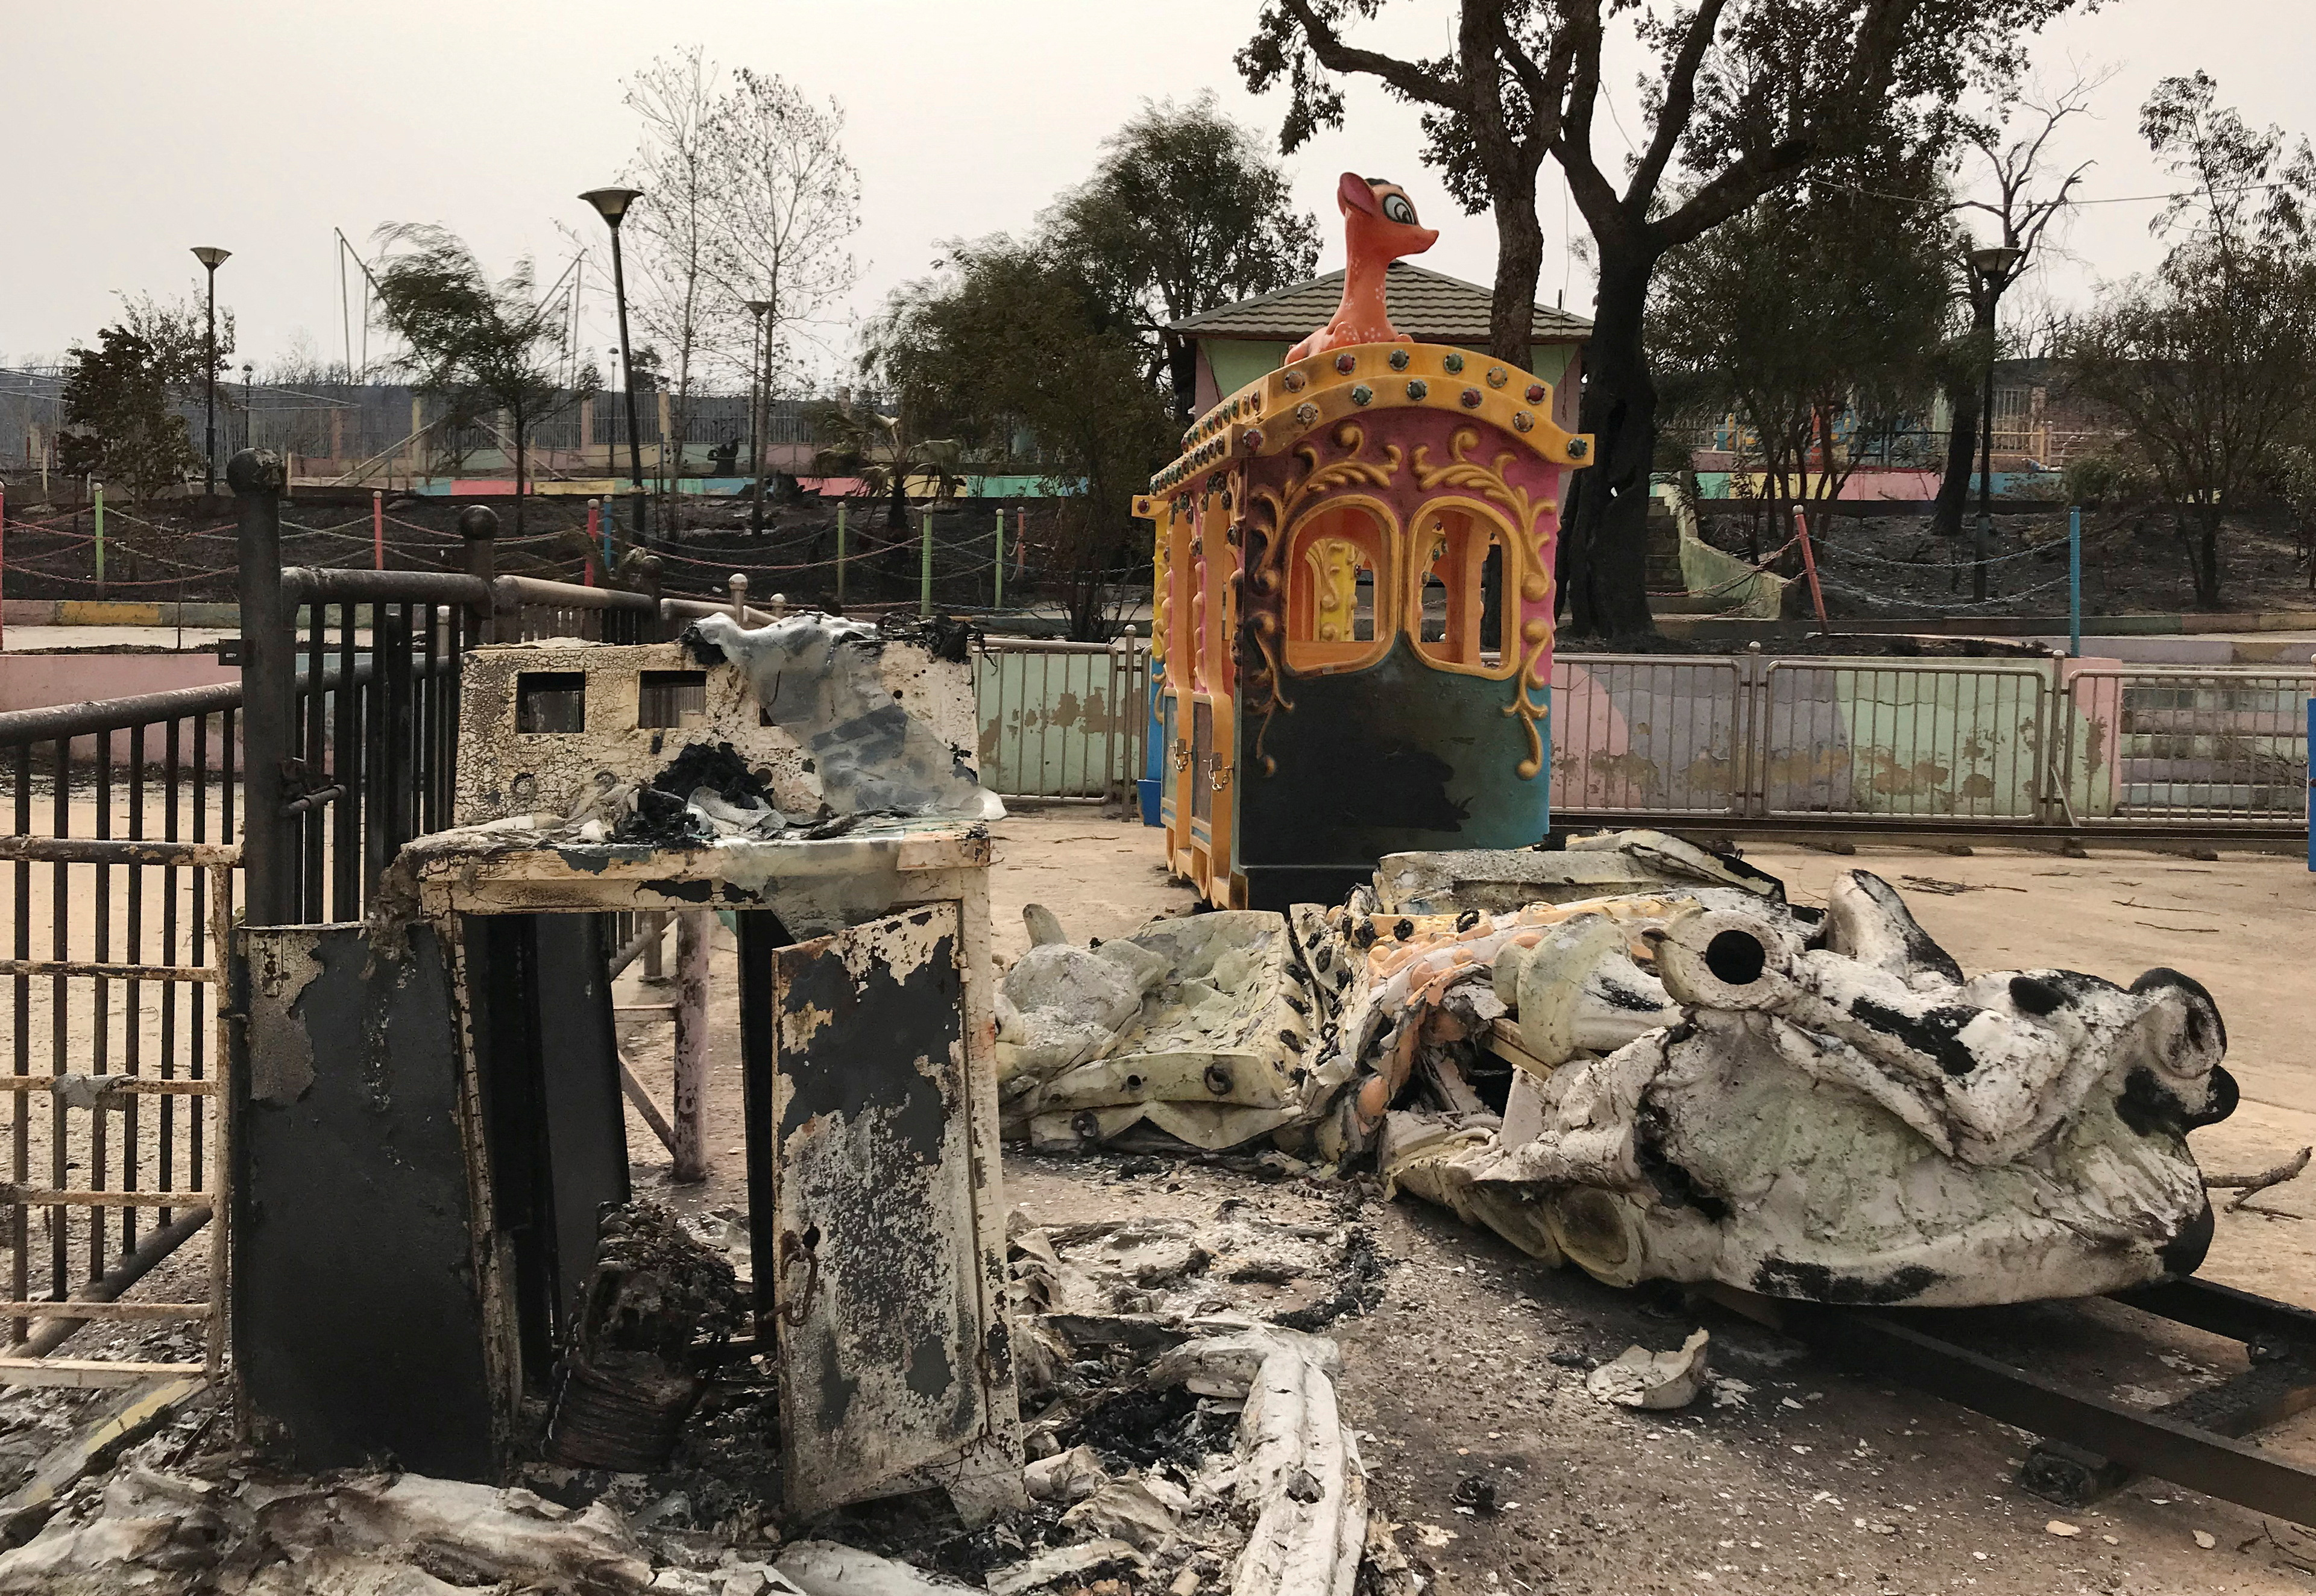 A view shows a damaged amusement park following a wildfire in El Kala